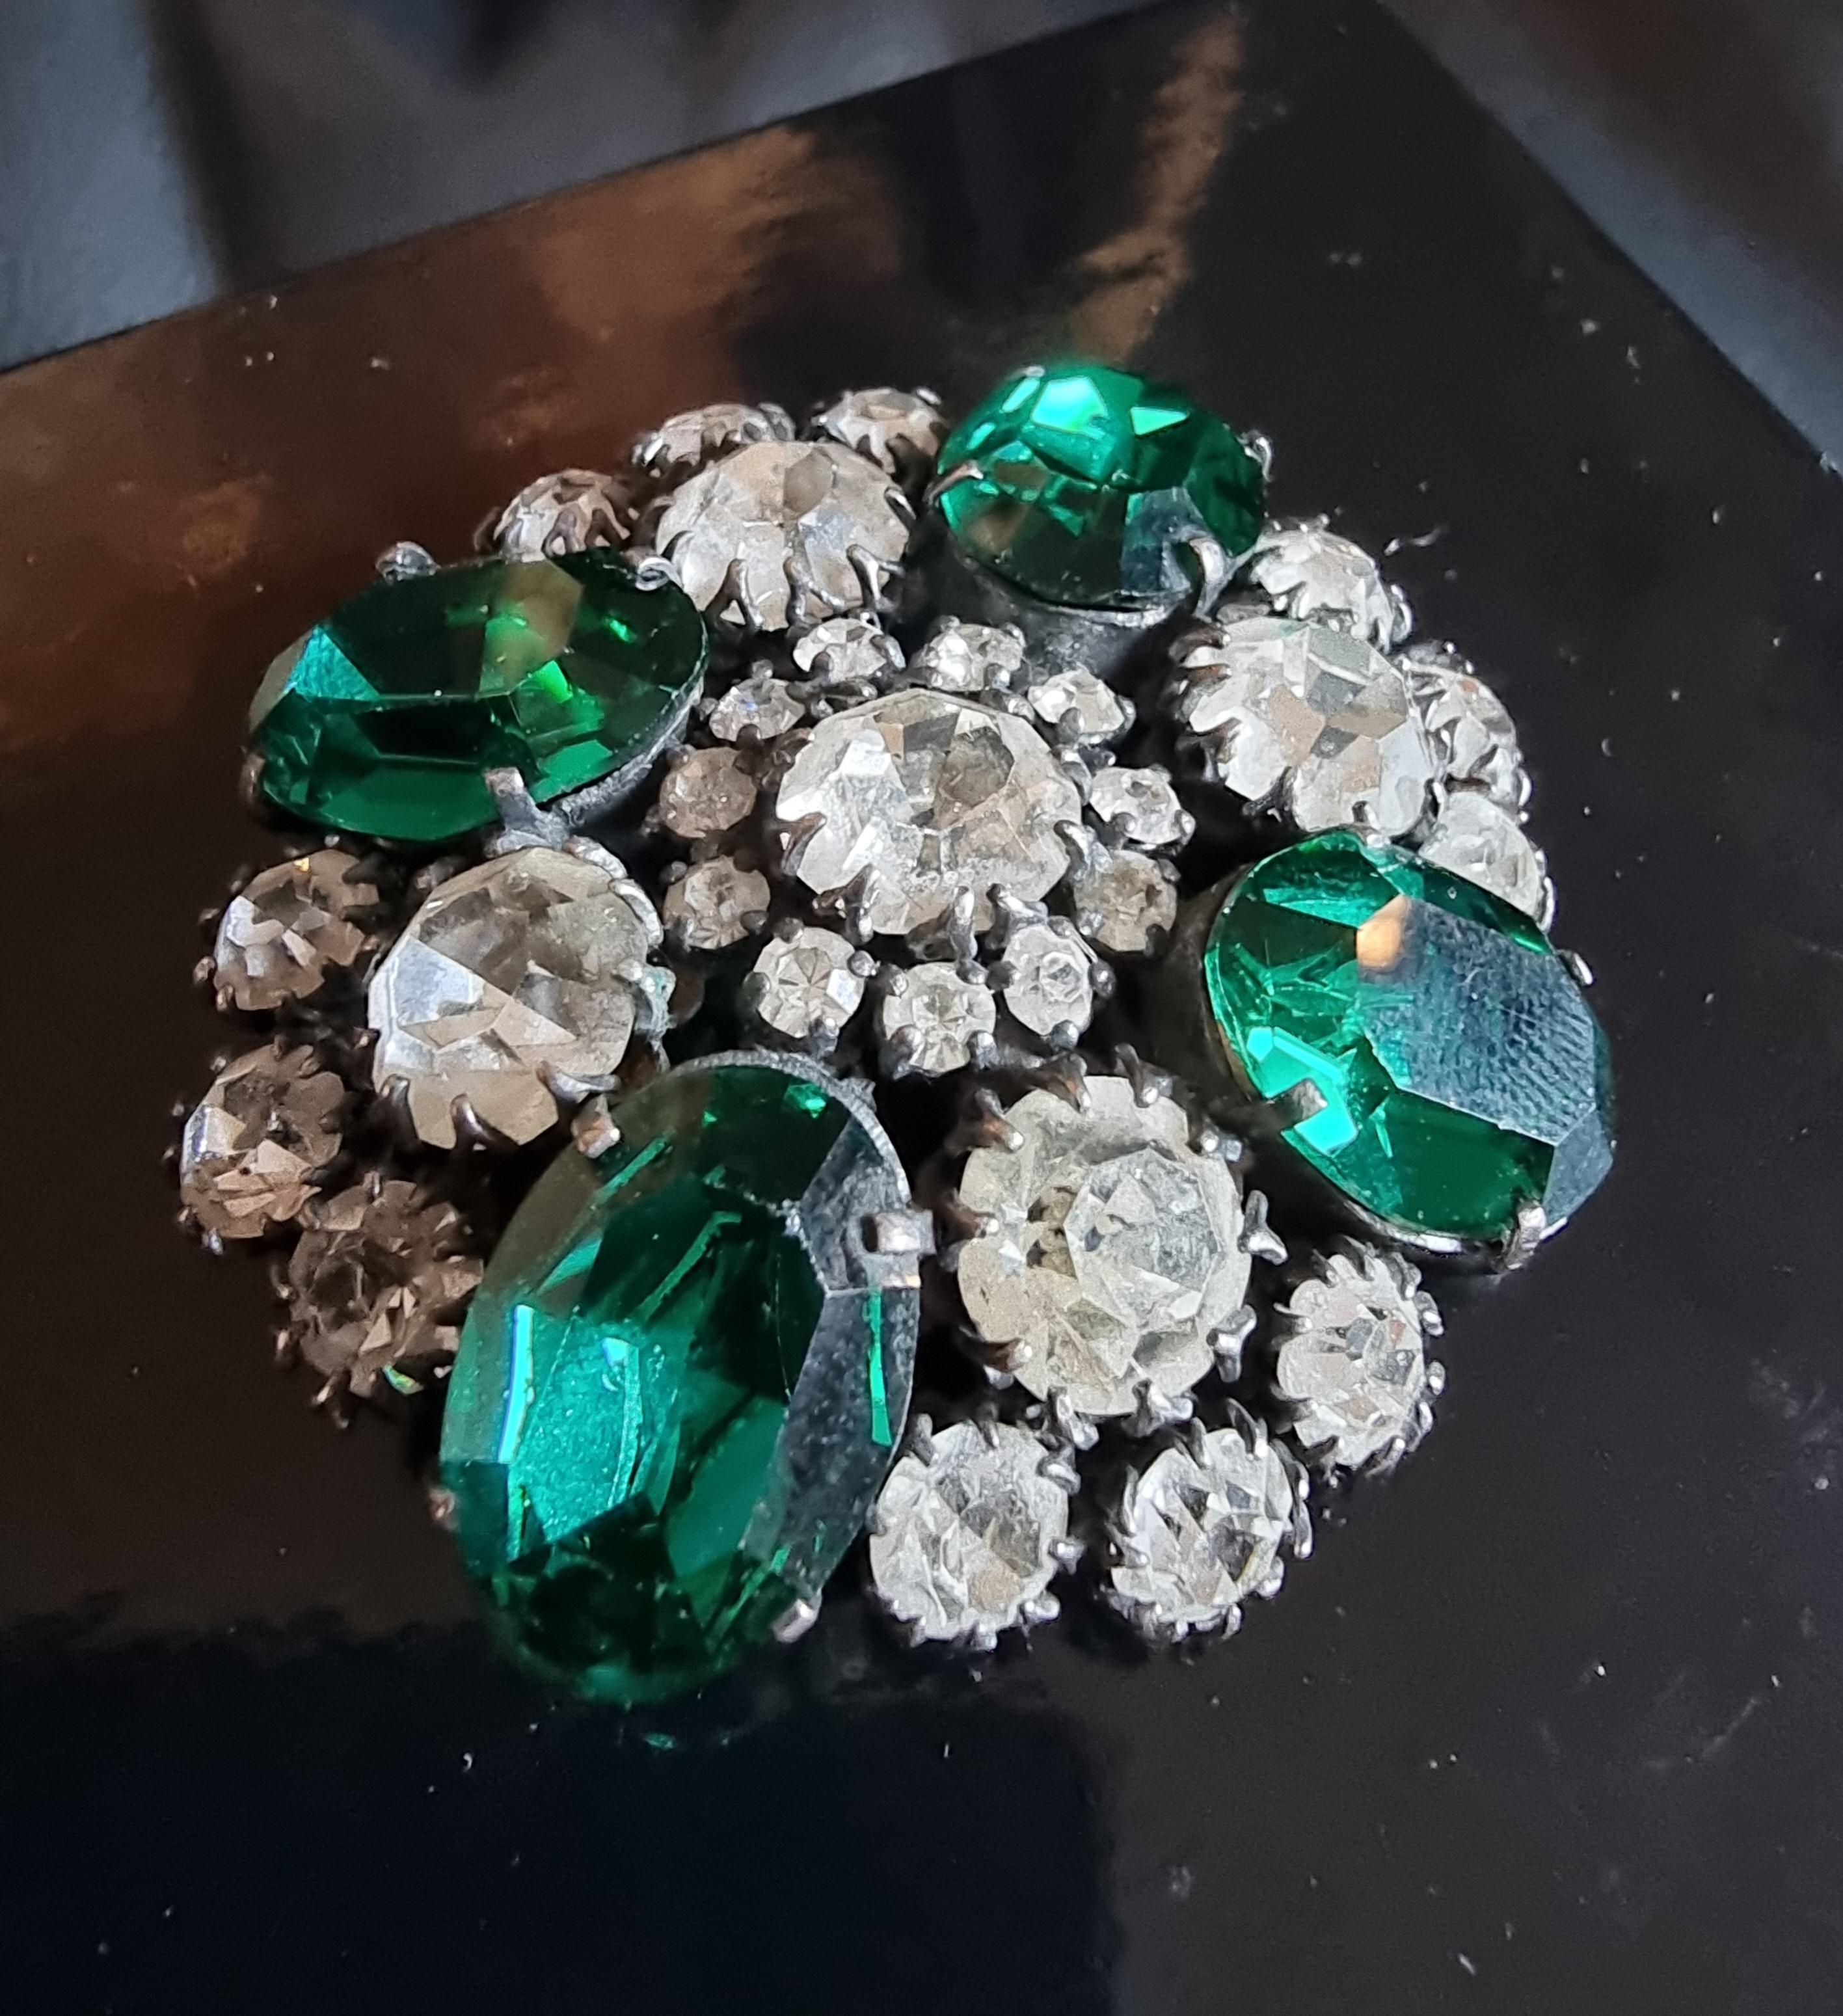 Magnificent large old BROOCH,
50s vintage,
rhinestones,
high fashion designer CIS countess Cissy ZOLTOWSKA,
length 5.5cm, width 5.5cm,
signed 